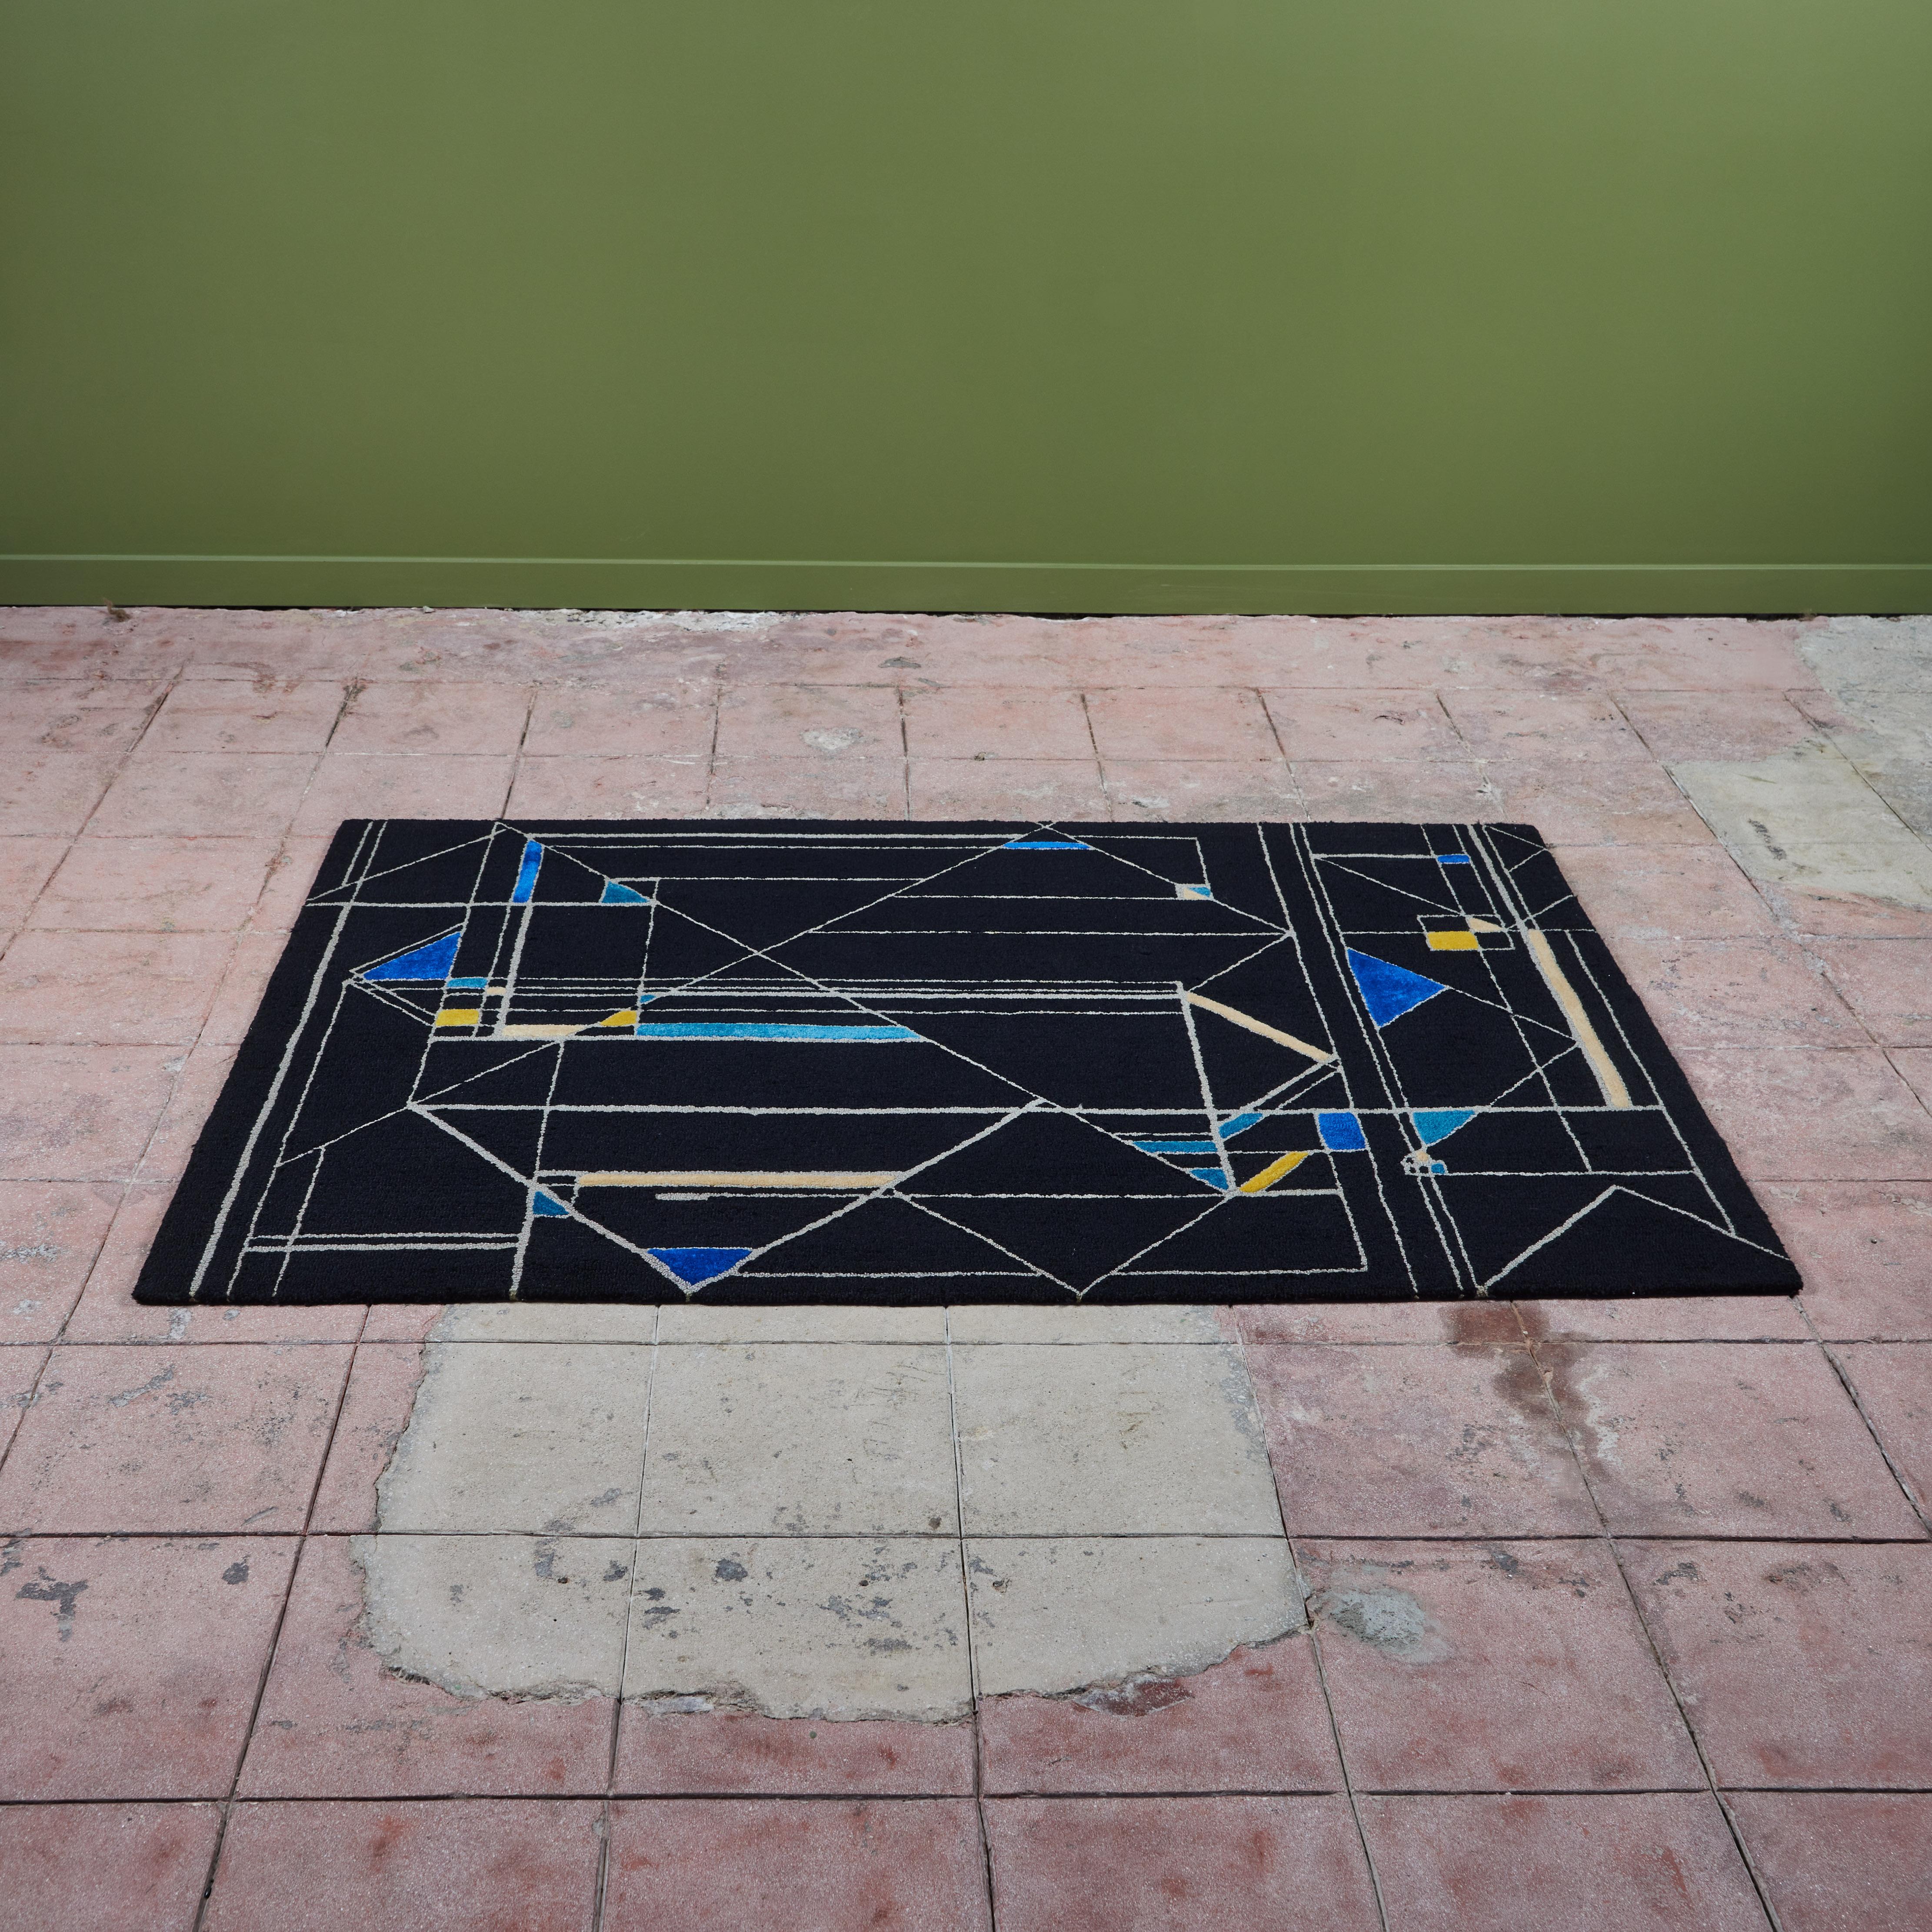 Edward Fields rug, c.1970s, USA. This wool rug features a geometric pattern of varying rectangles and triangles in hues of black, blue, yellow and cream. Signed on the back.

Dimensions
71.5